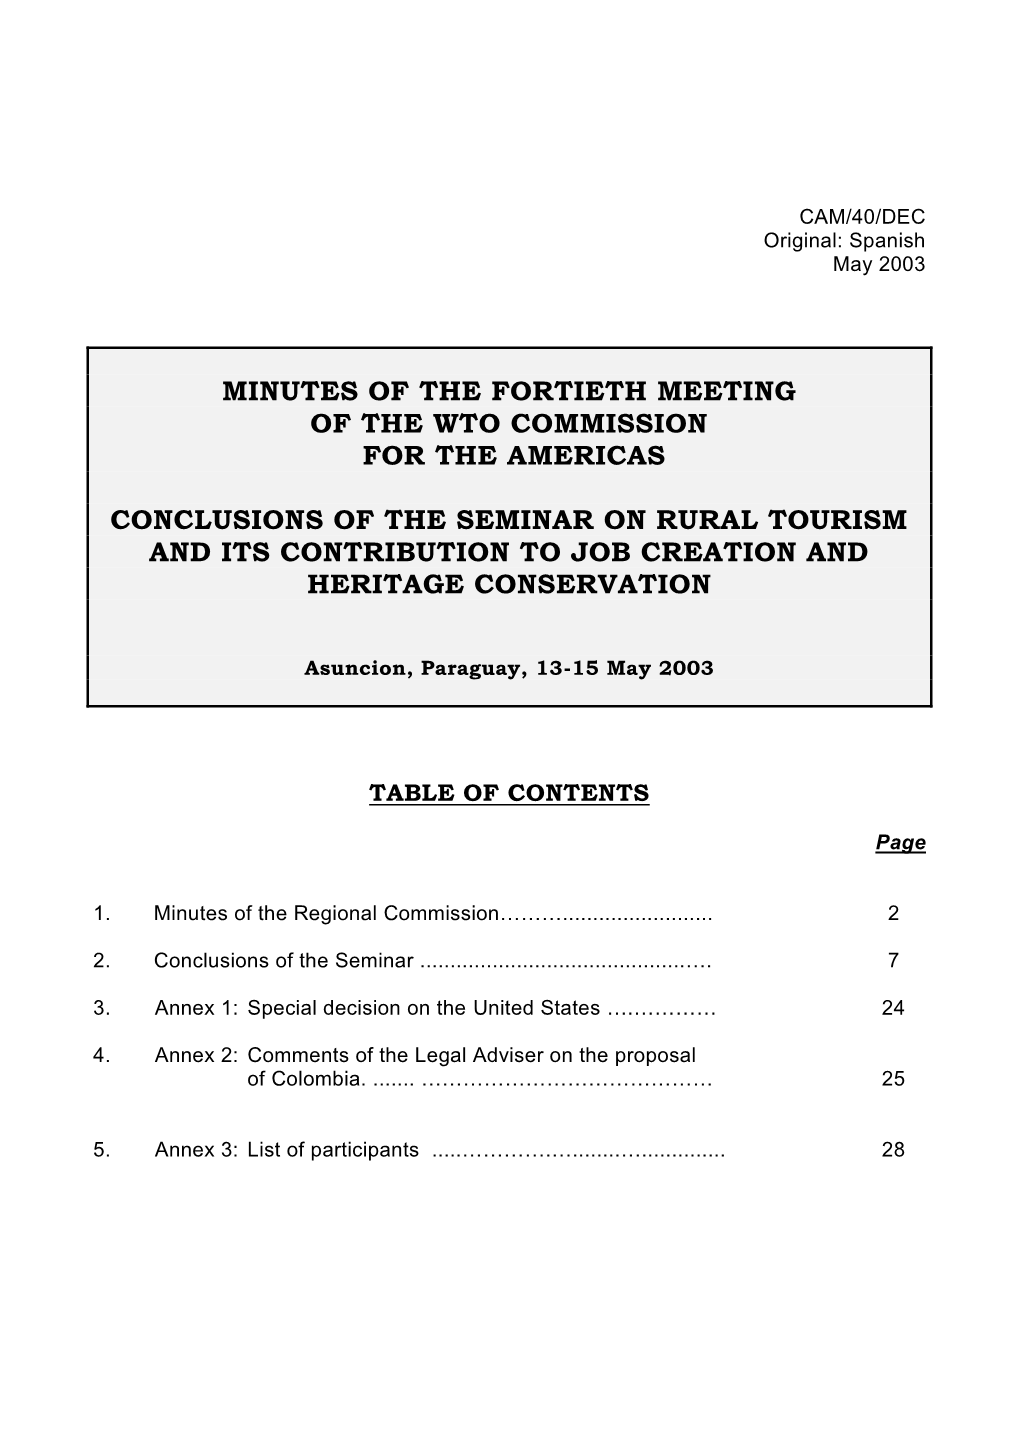 Minutes of the Fortieth Meeting of the Wto Commission for the Americas